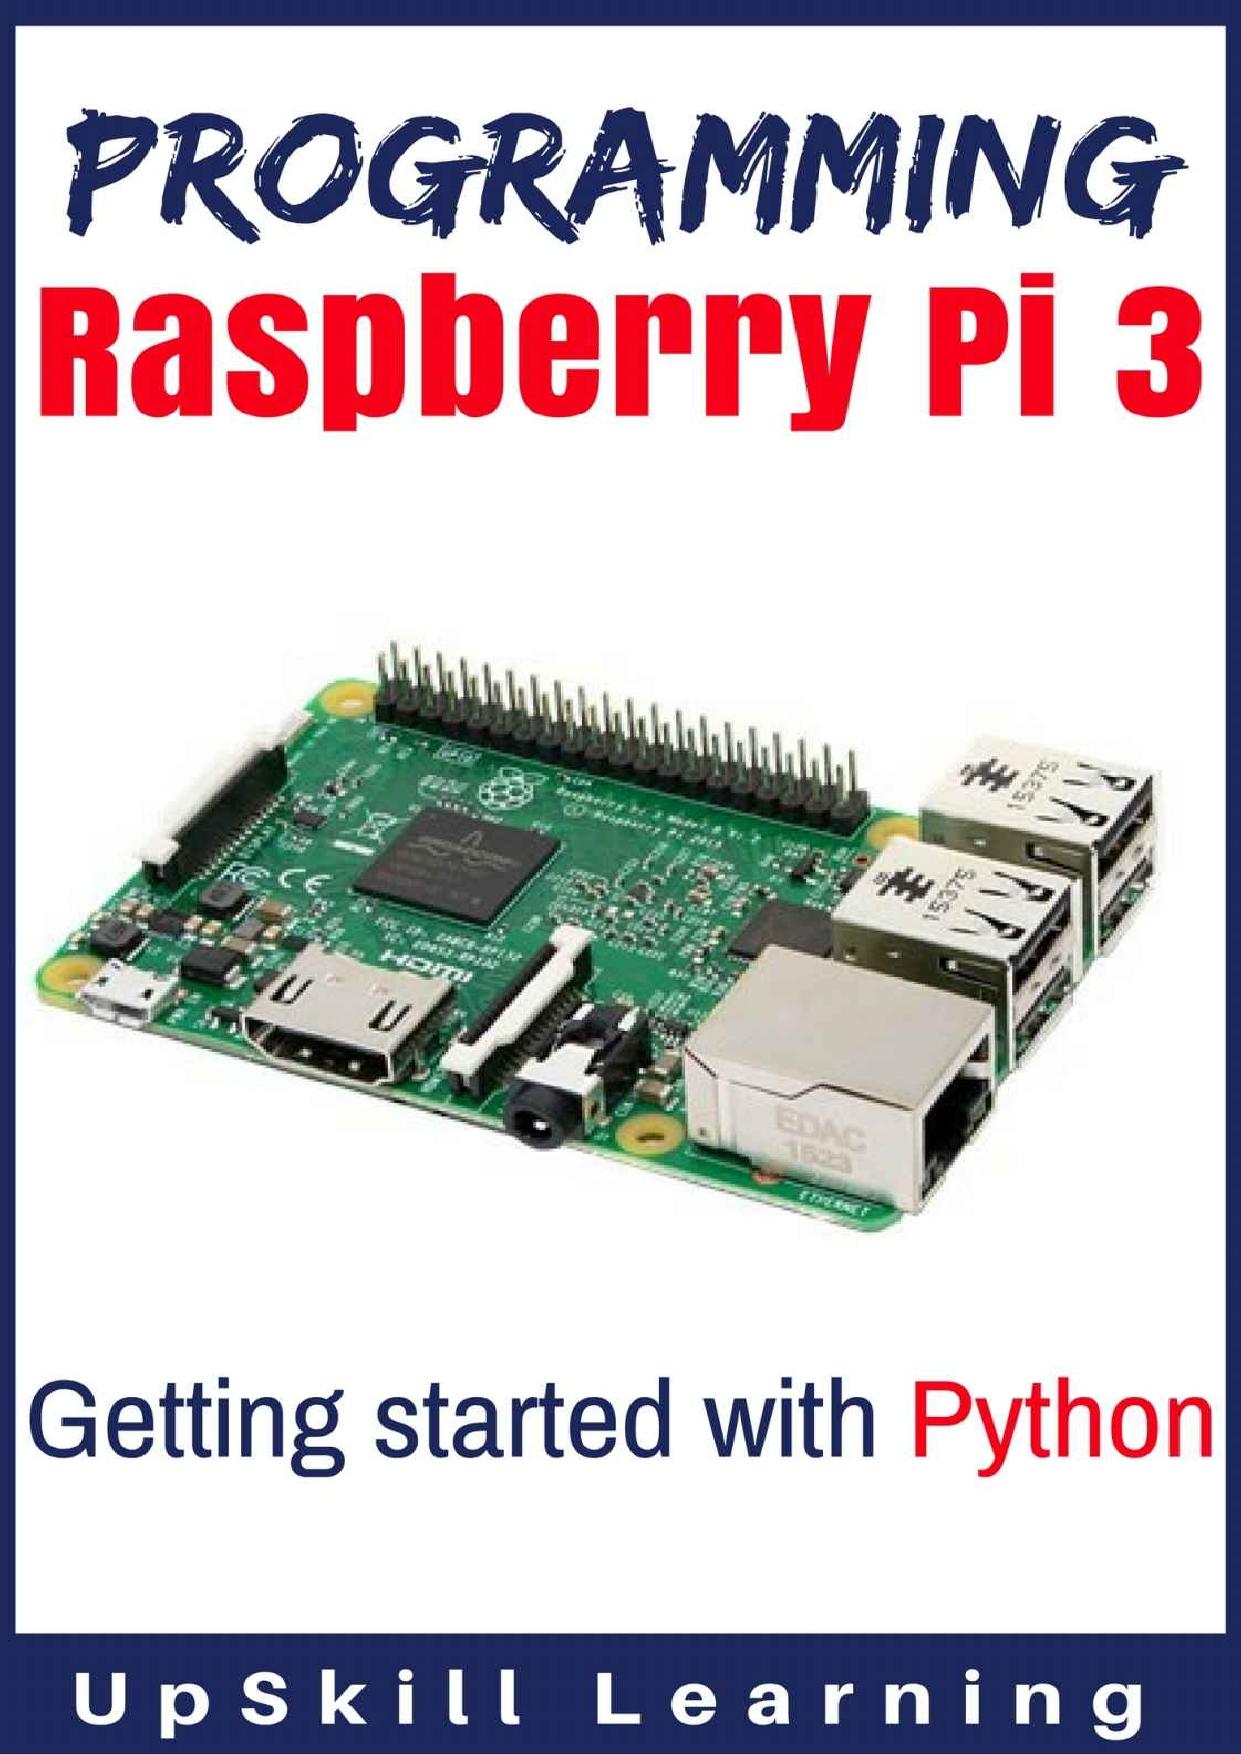 raspberry pi 3 user guide free download